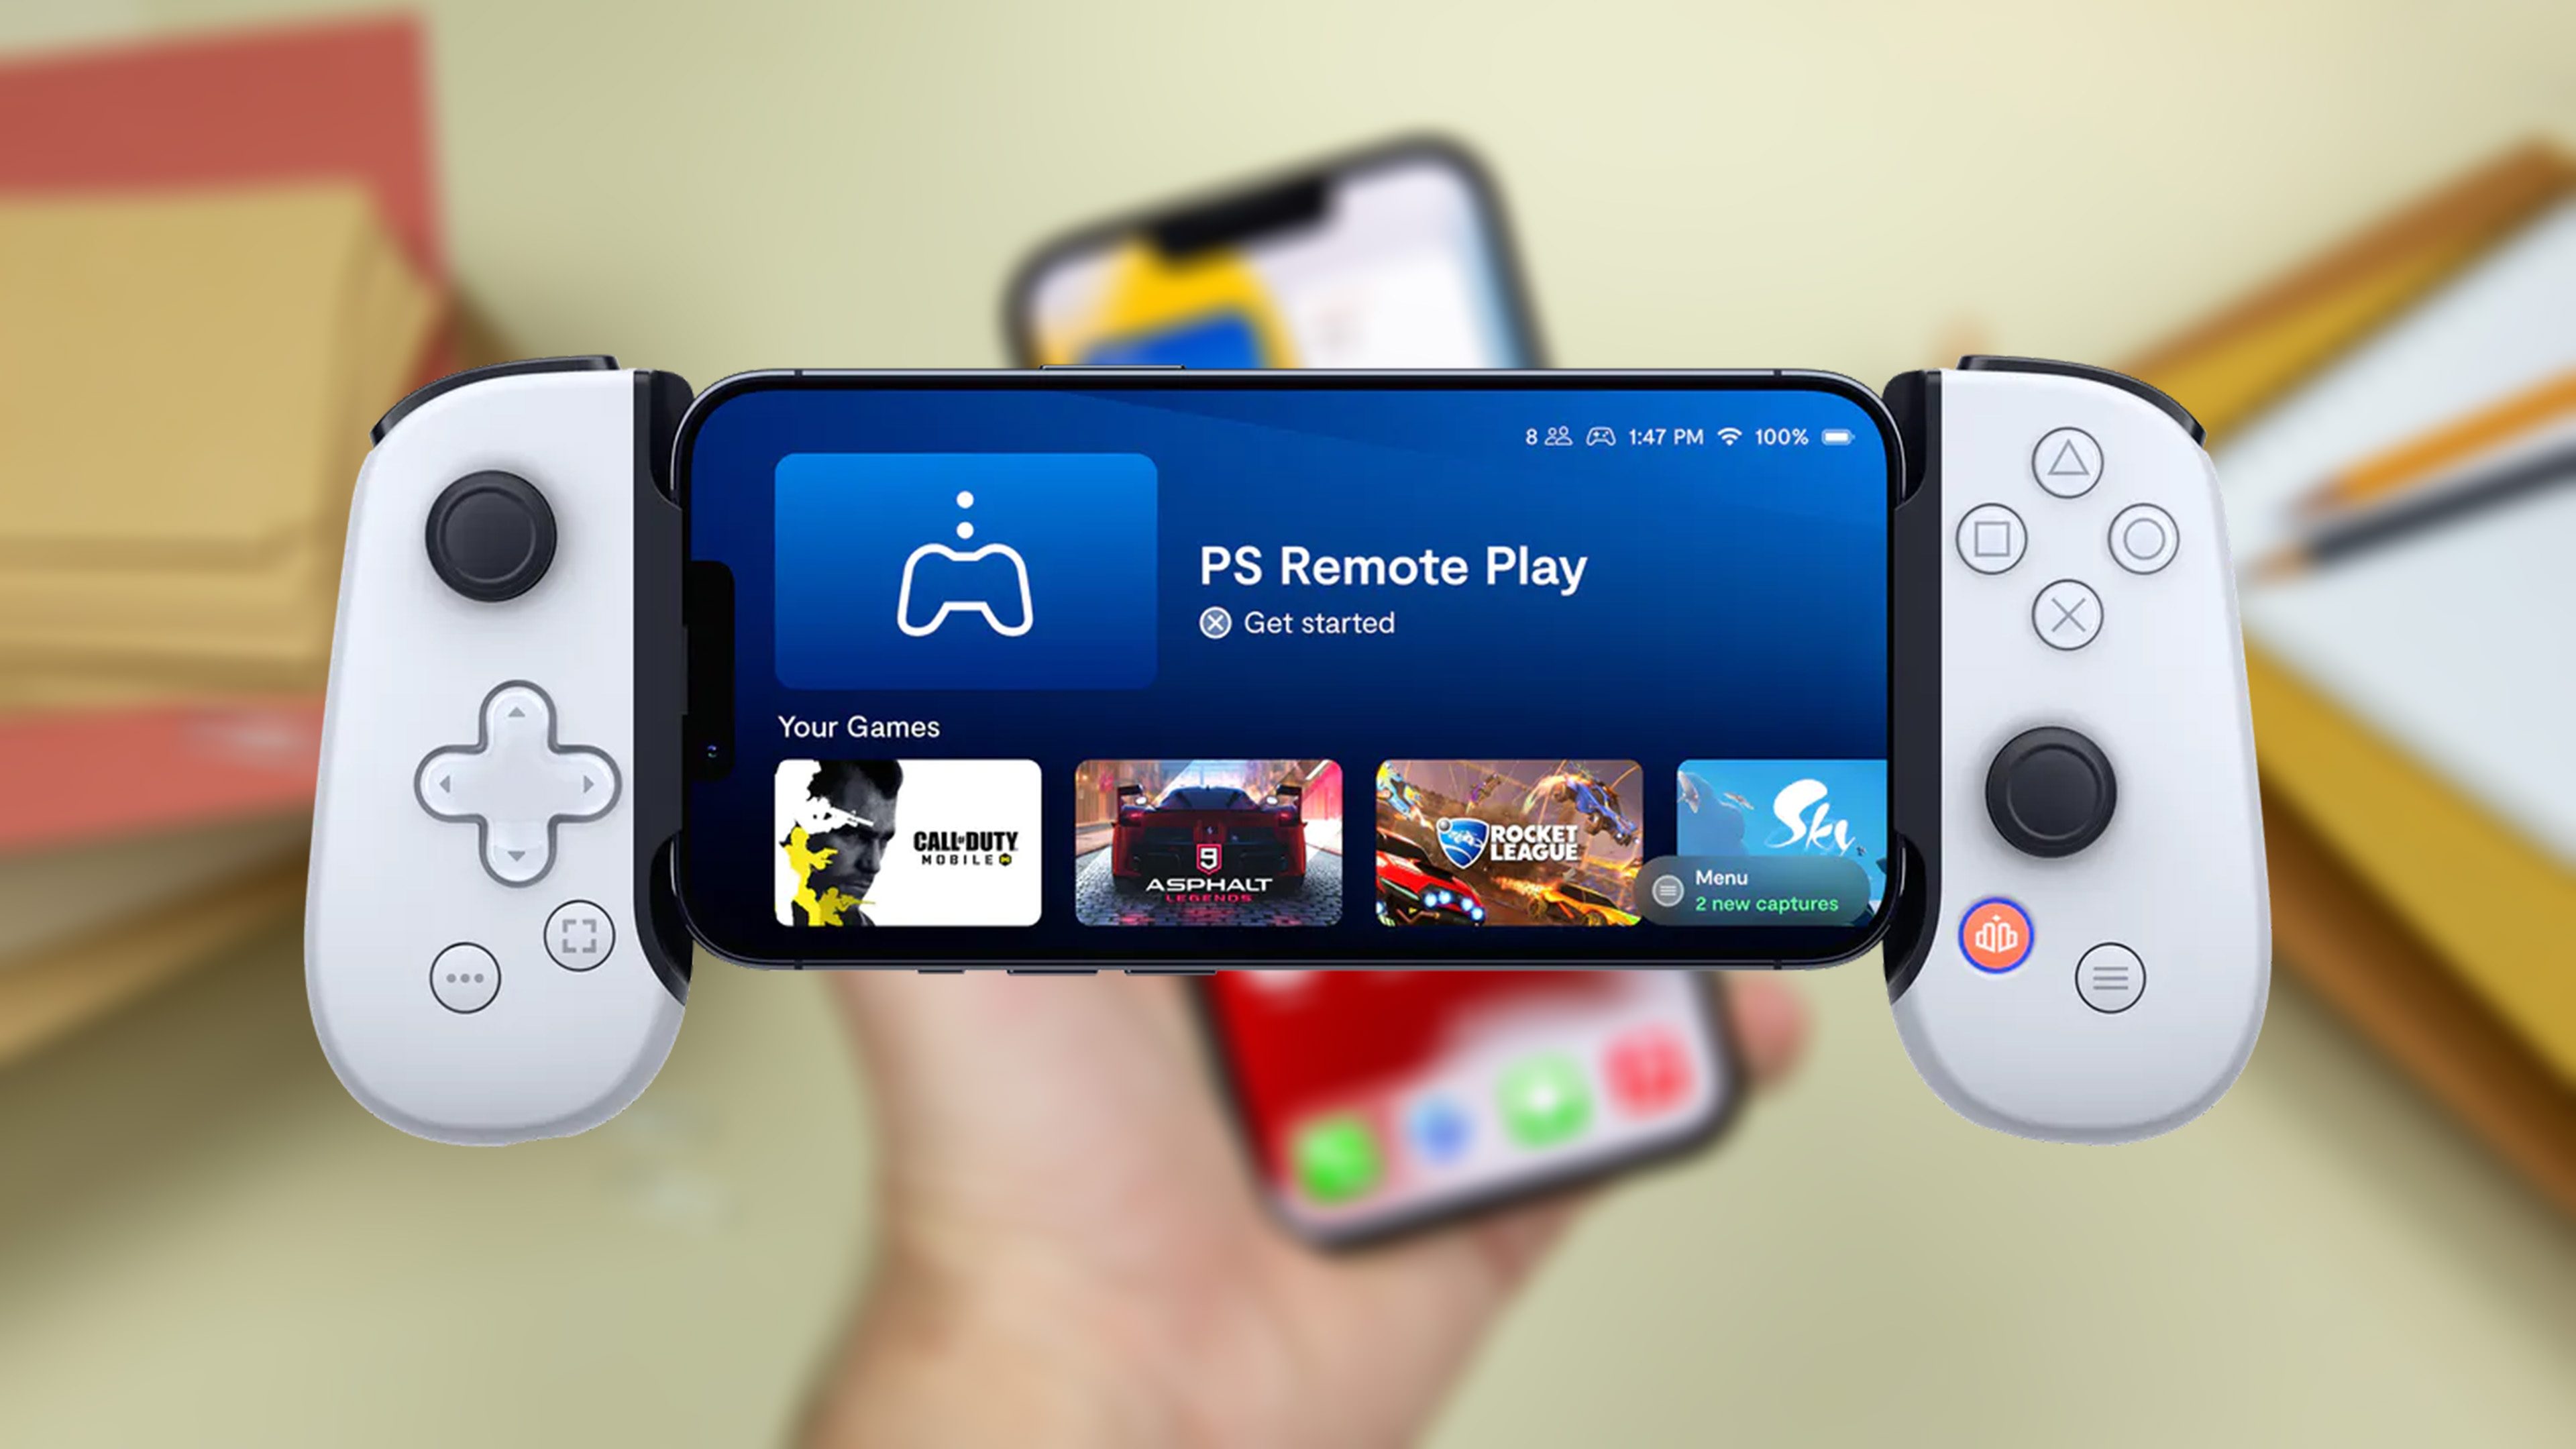 NEXT LEVEL iPhone Gaming - Backbone Controller PlayStation Edition! 